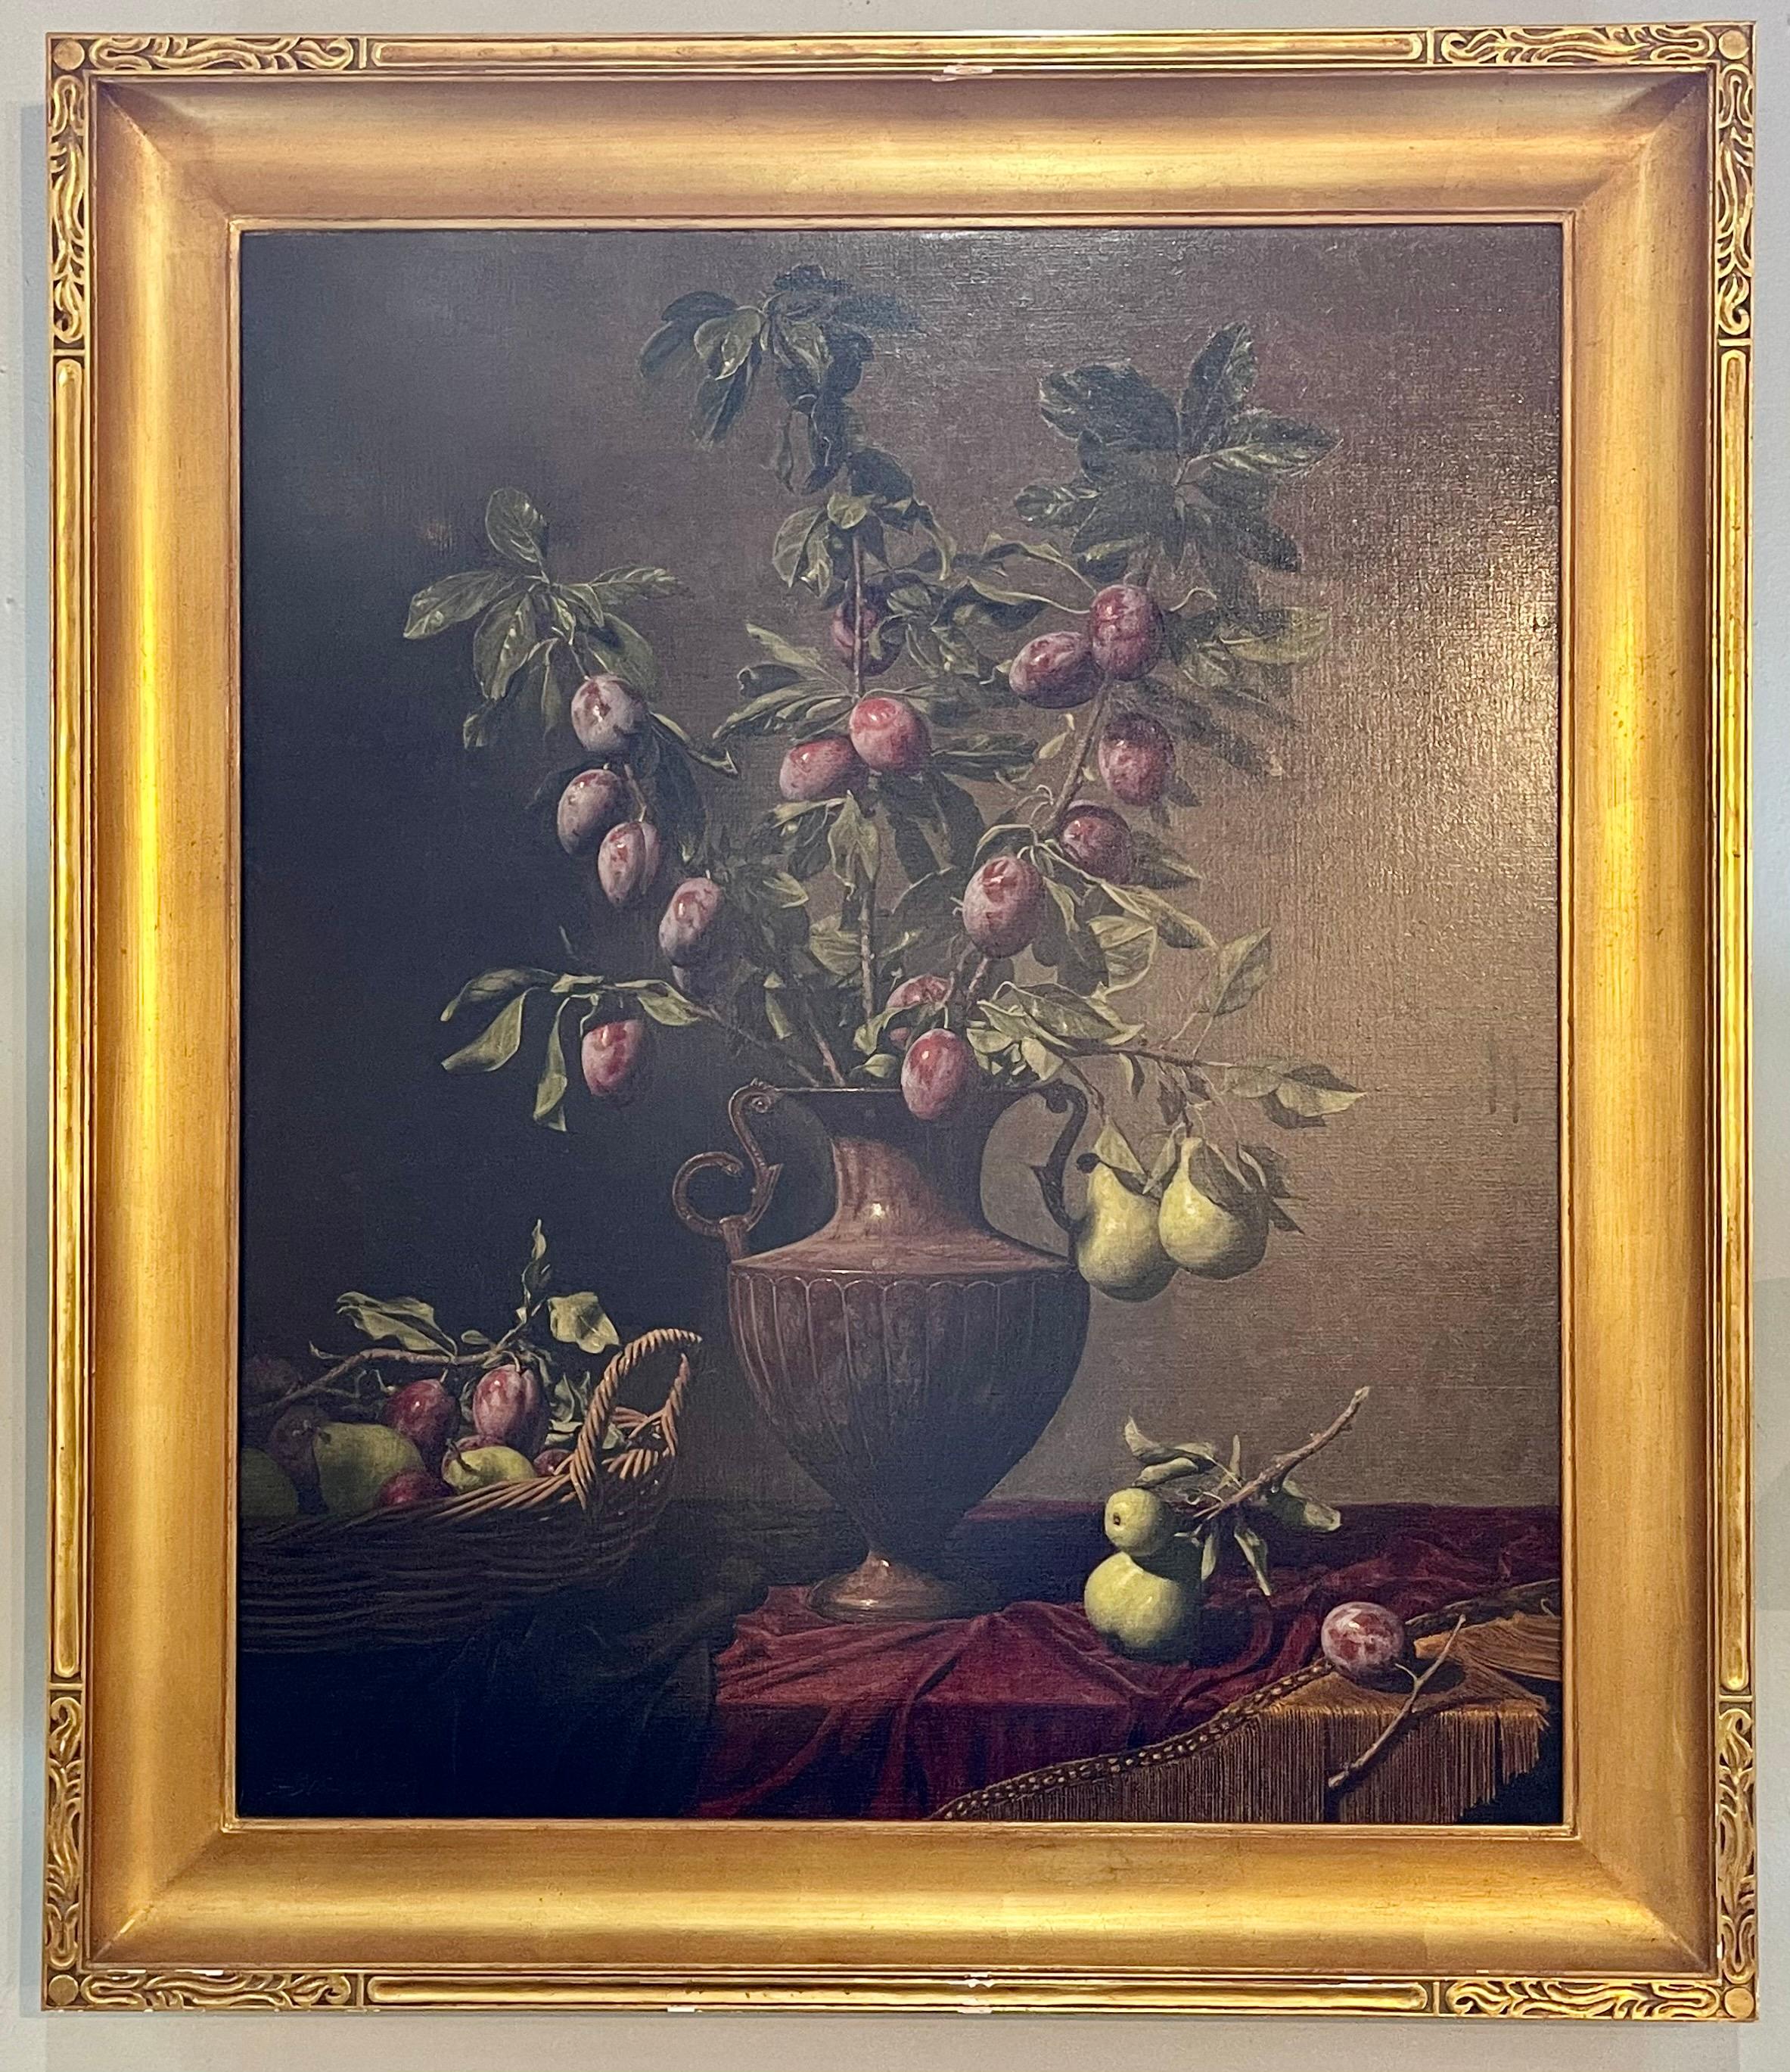 American Classical Frank Arcuri, Still Life Oil on Canvas. Framed. “Small Feast with Figs” 1999